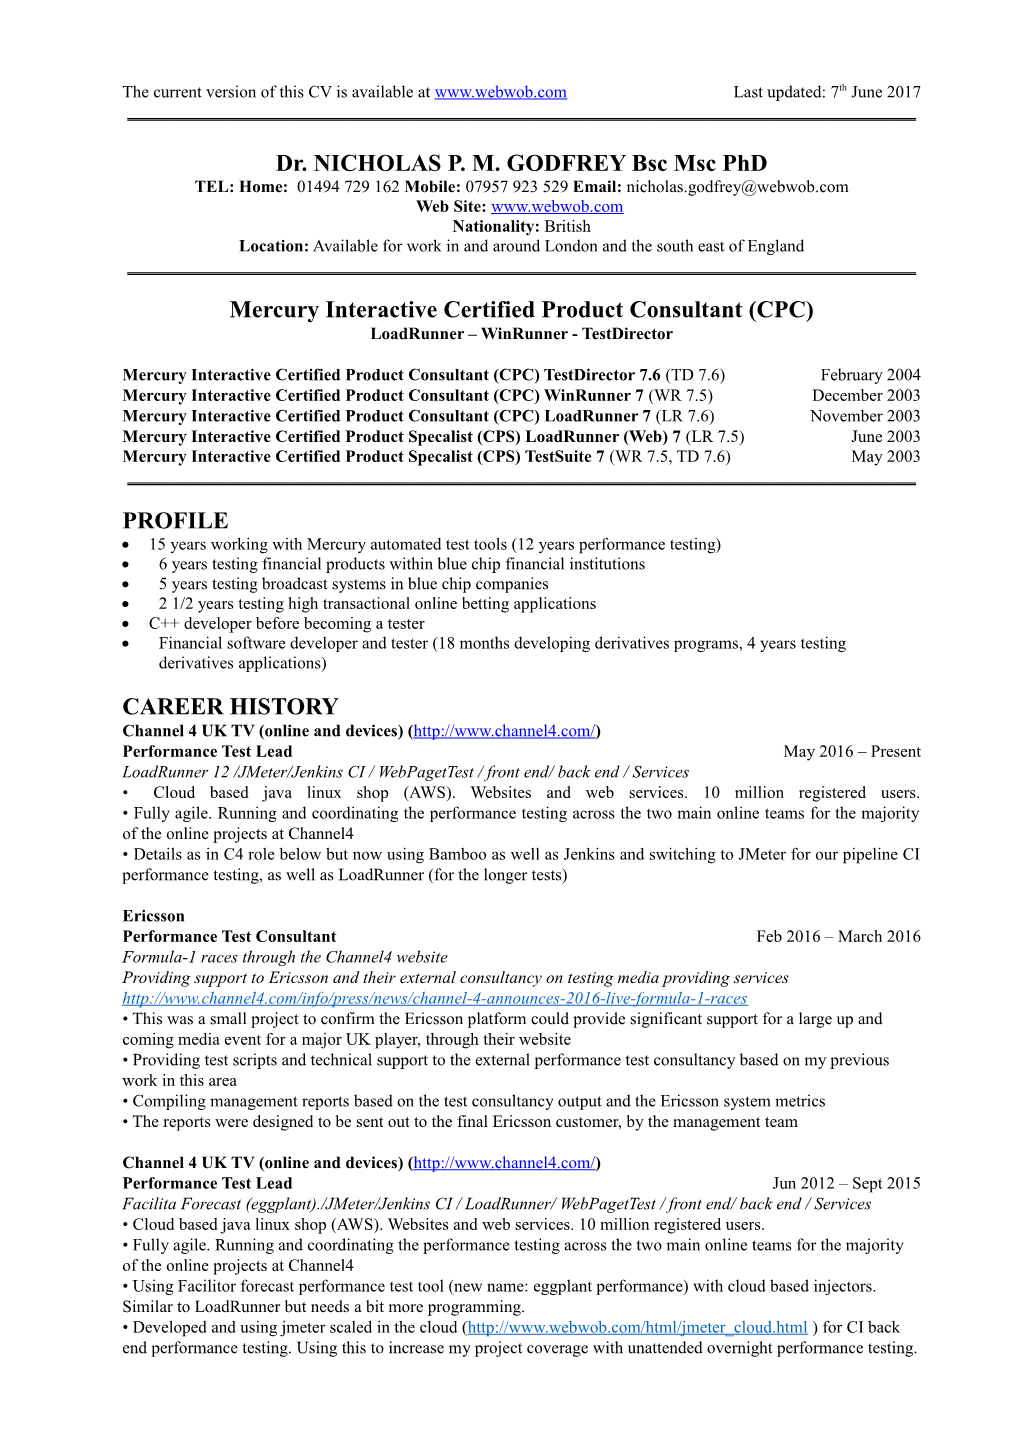 The Current Version of This CV Is Available at Www